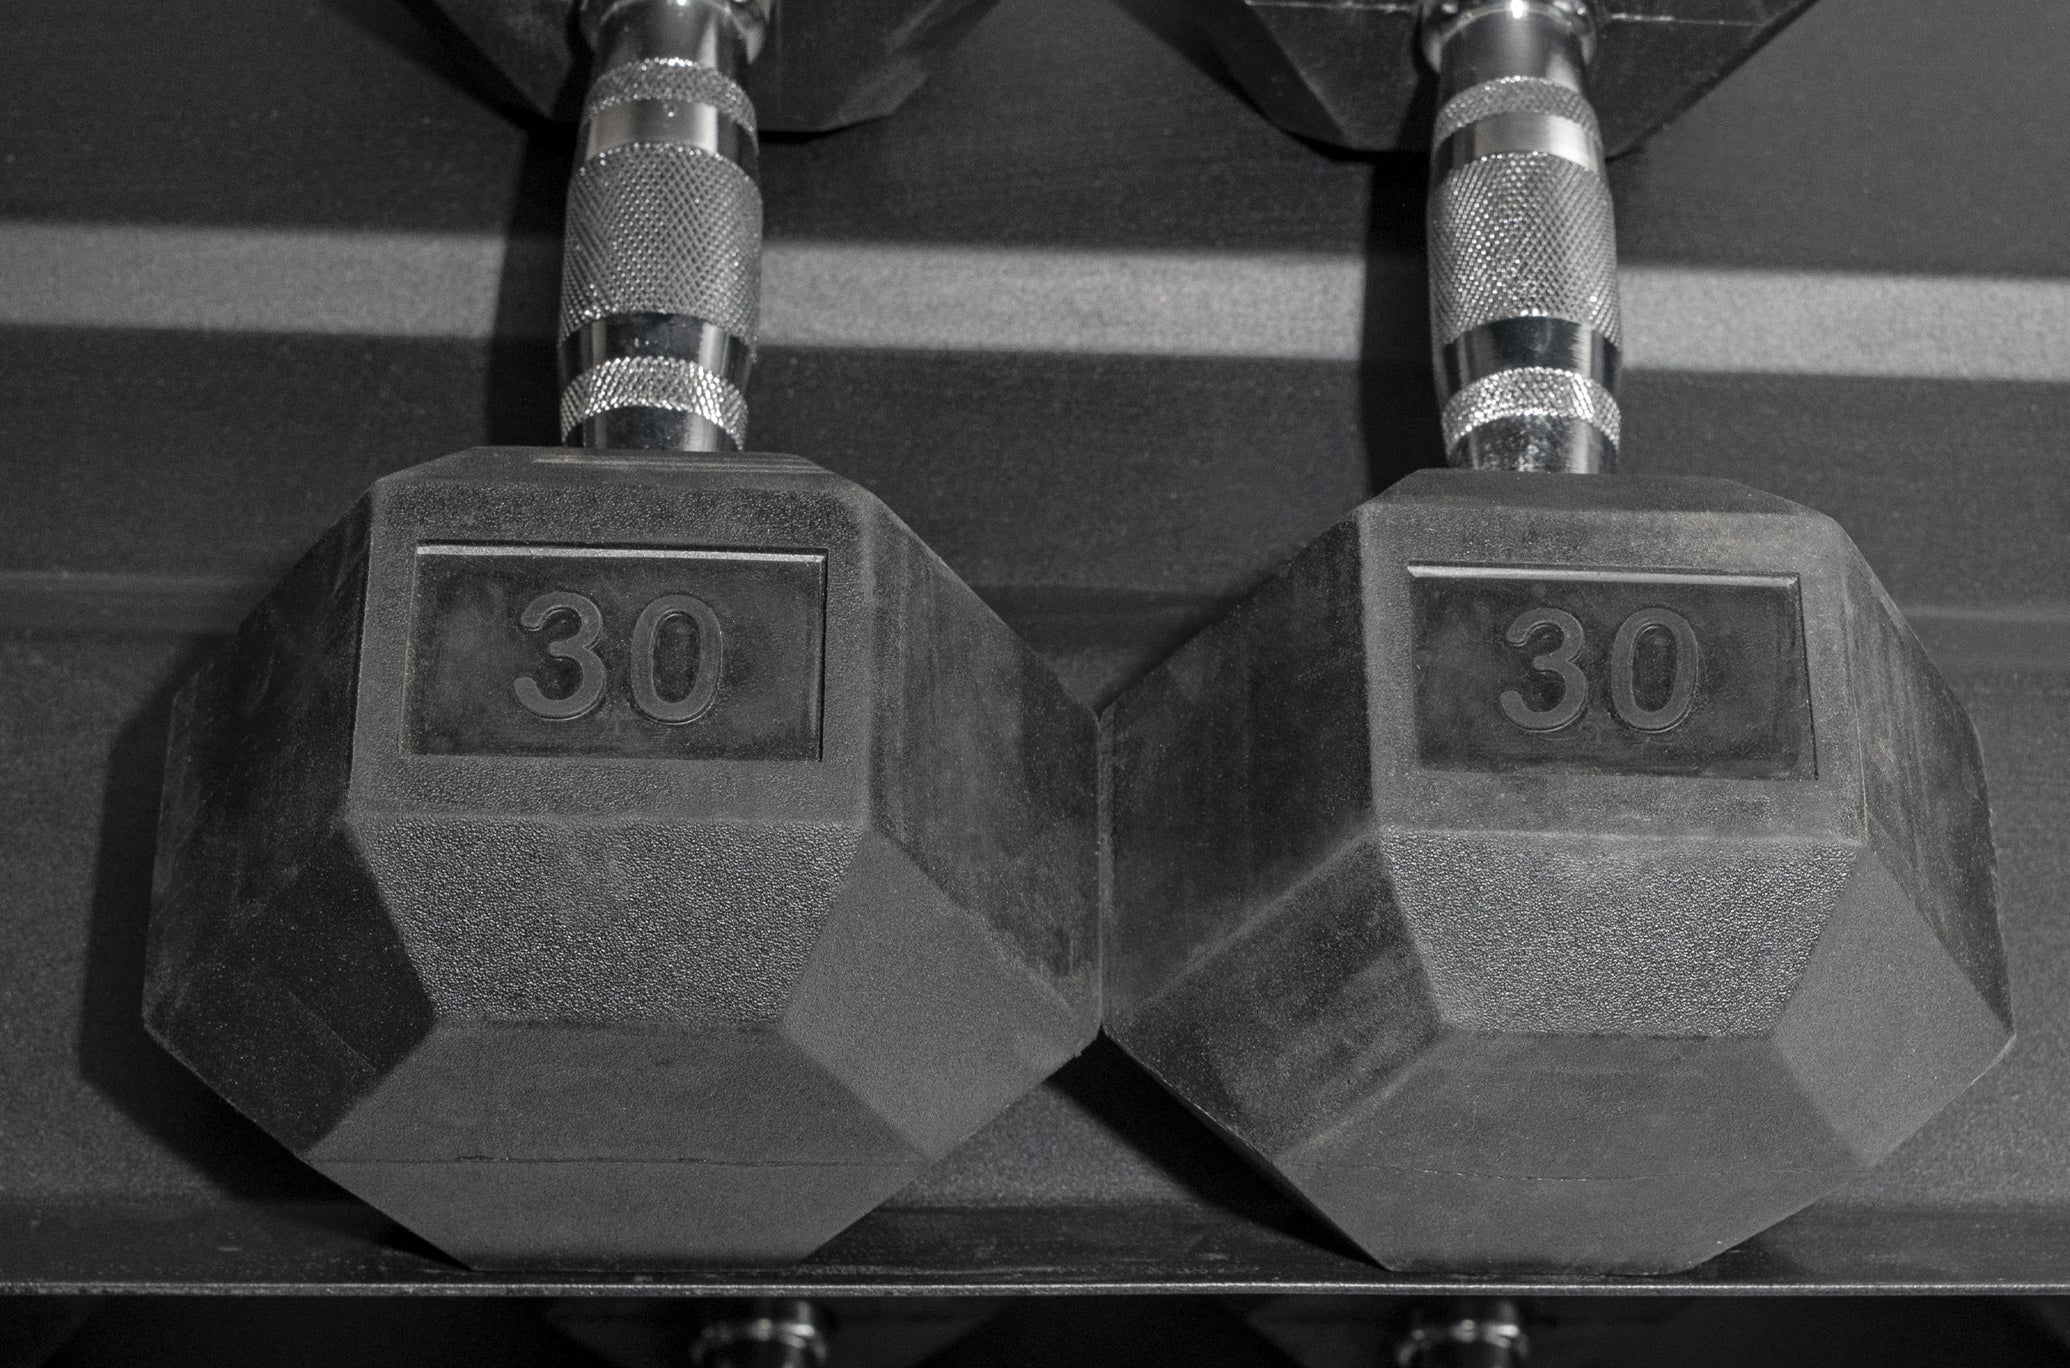 5-50 Rubber Hex Dumbbell Set with 4' Storage Rack